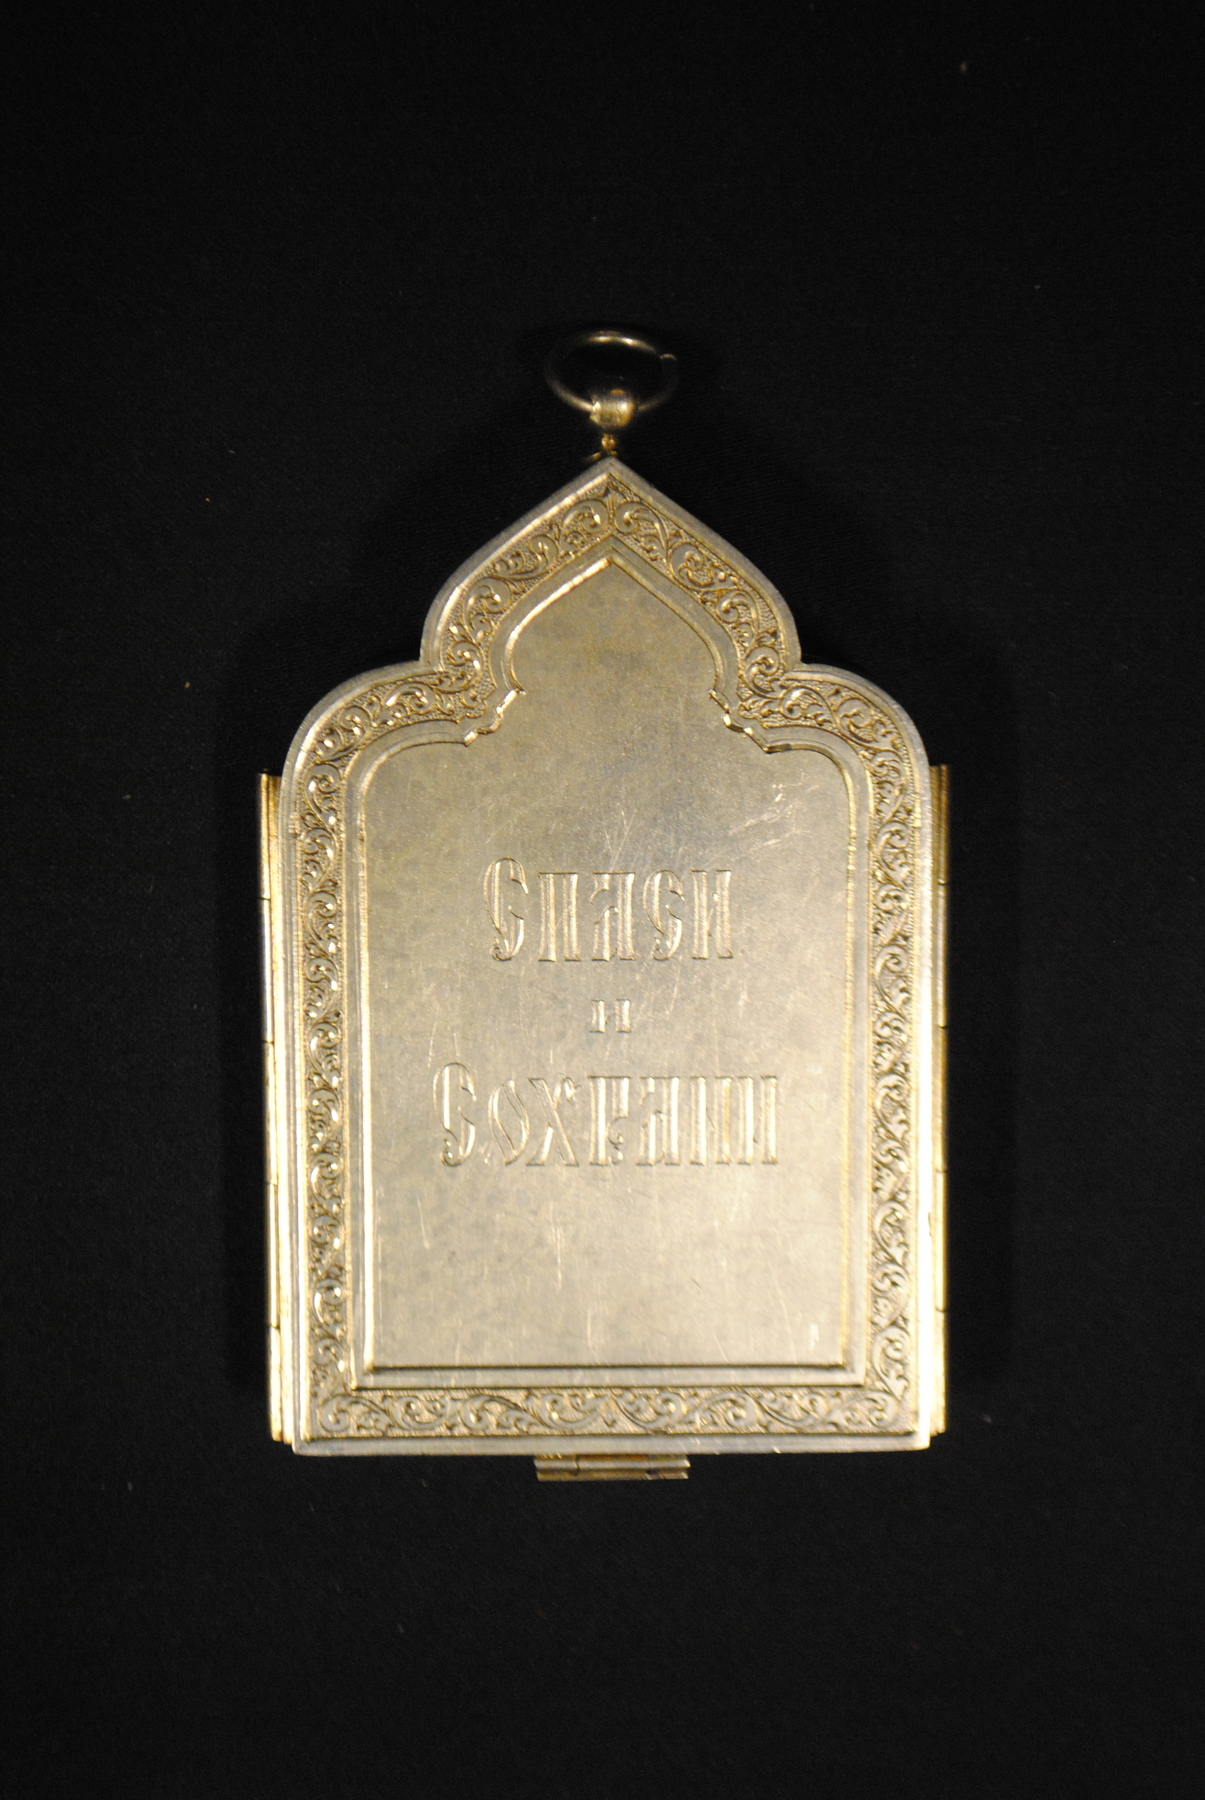 OIL ON ZINC, STAMPED WITH MAKER’S MARK AMM IN CYRILLIC, MOSCOW, 1880s, 84 STANDARD